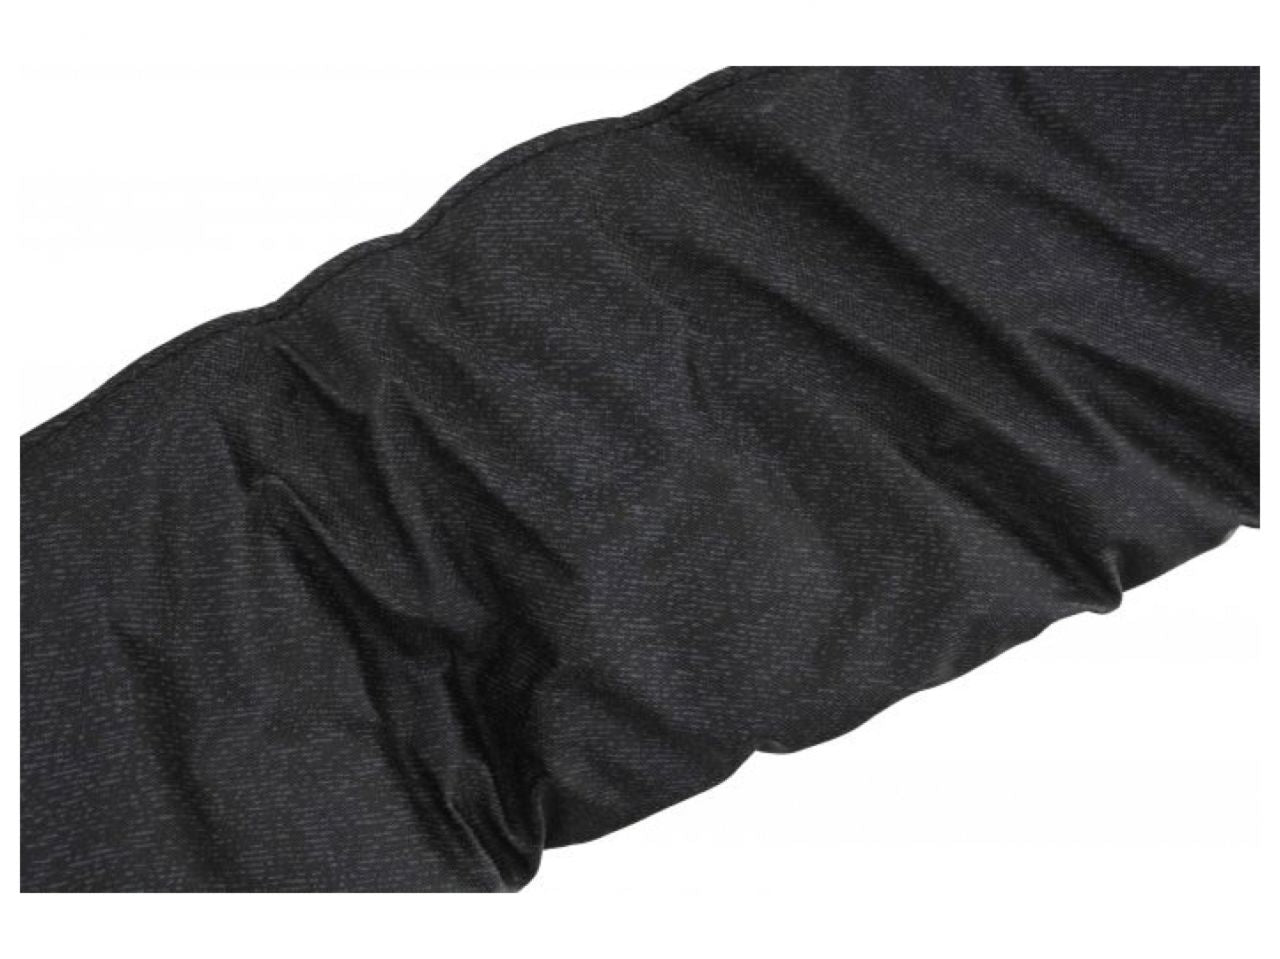 Rampage Roll Bar Pad and Cover Kit for 1992-1995 Jeep Wrangler YJ, Black Denim